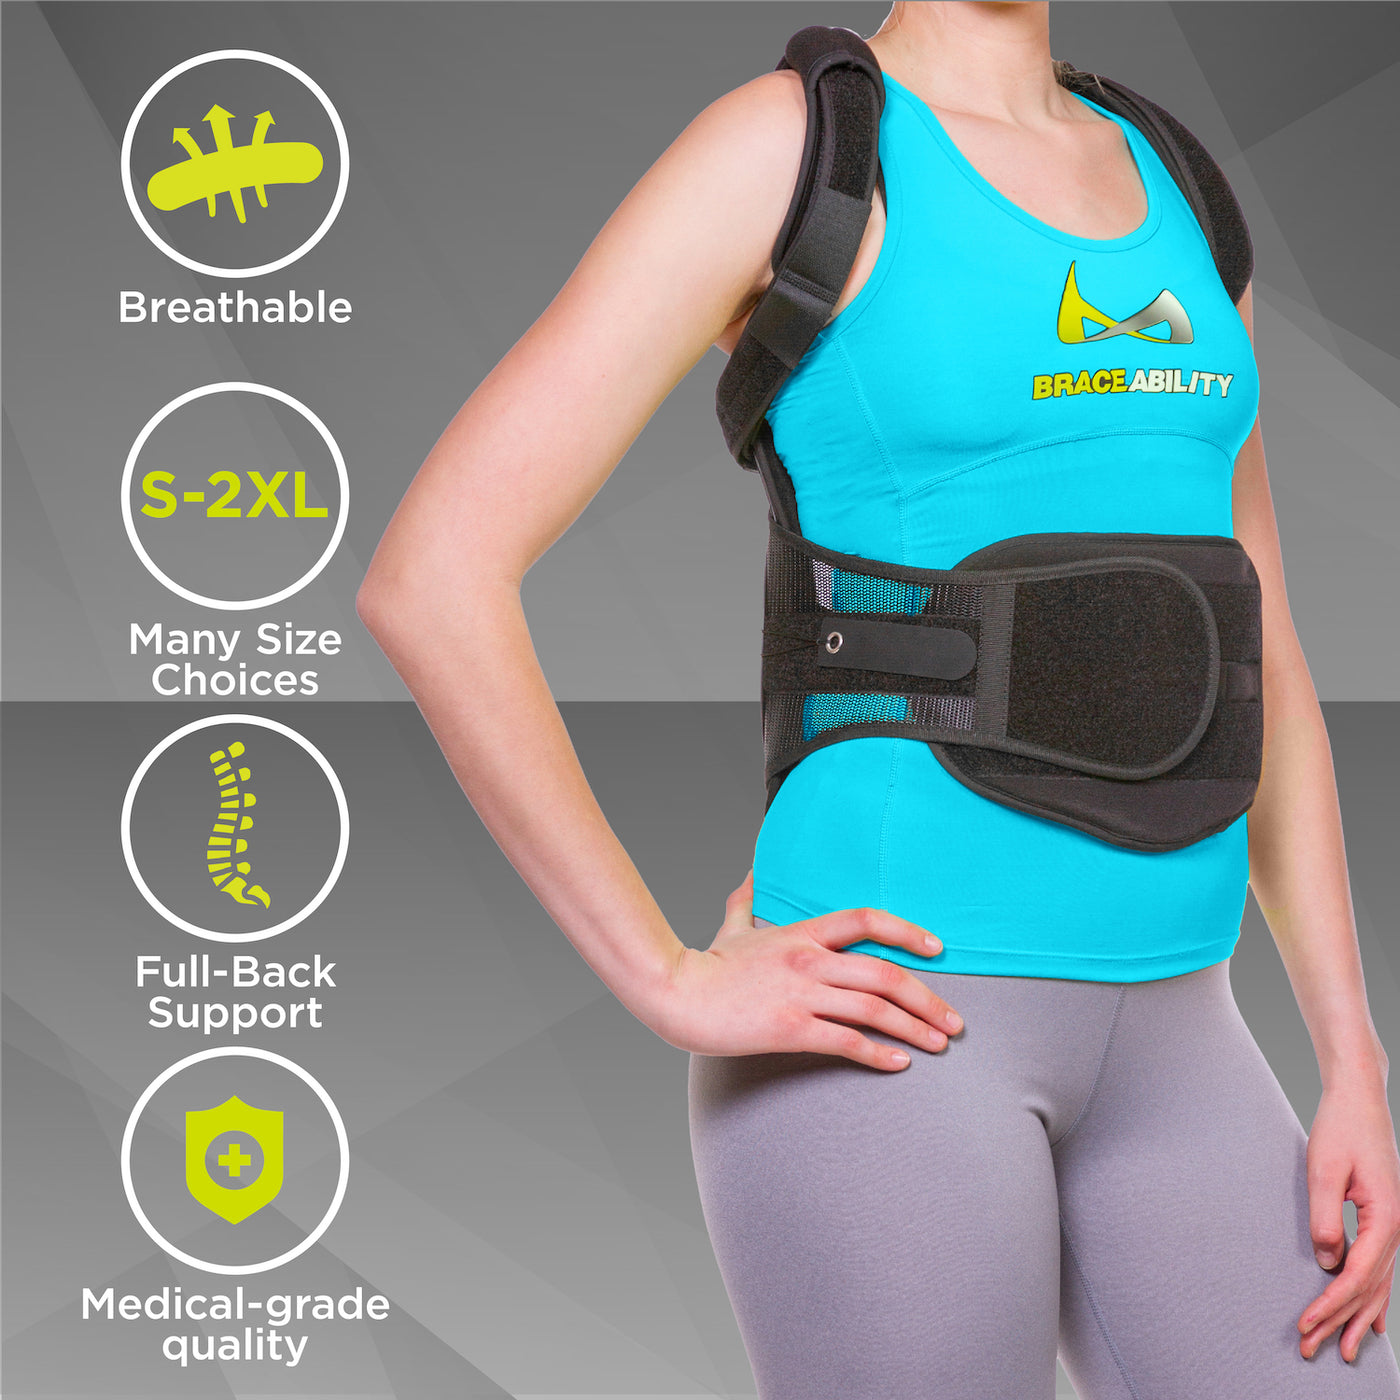 Our breathable thoracic kyphosis back brace is made with medical-grade quality materials to use for extended time waiting for surgery